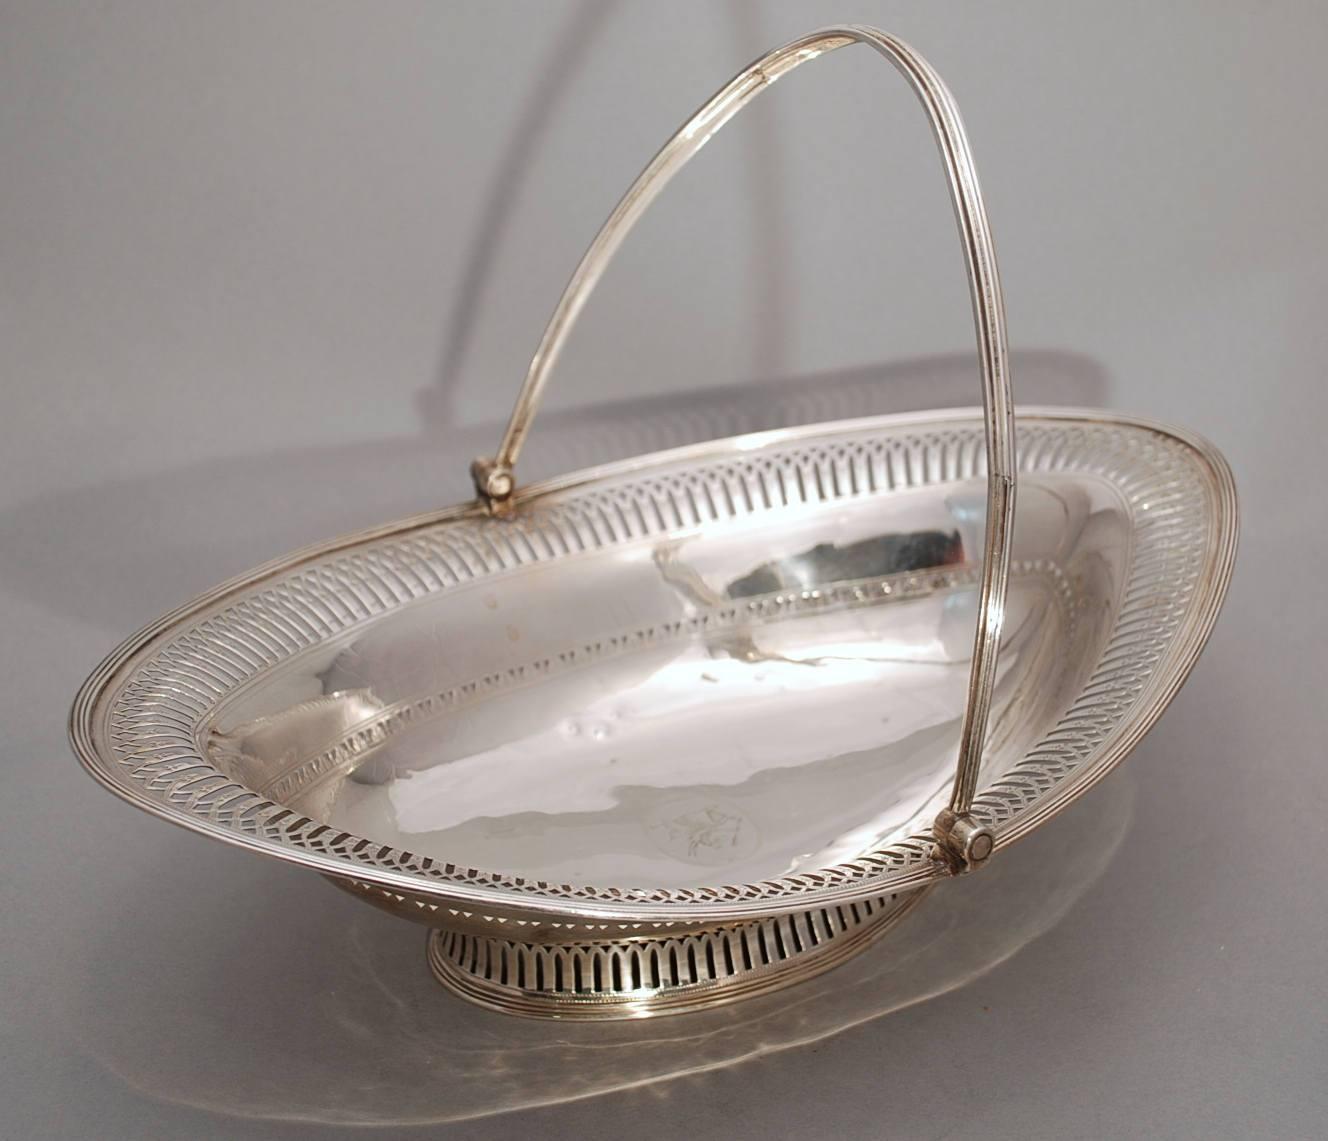 Beautiful Georgian sterling silver pierced oval basket made in London, Circa 1796. Swing handle attached to an oval body with a beautifully pierced border around the perimeter sitting on a collet foot. It is fully hallmarked as shown, though the